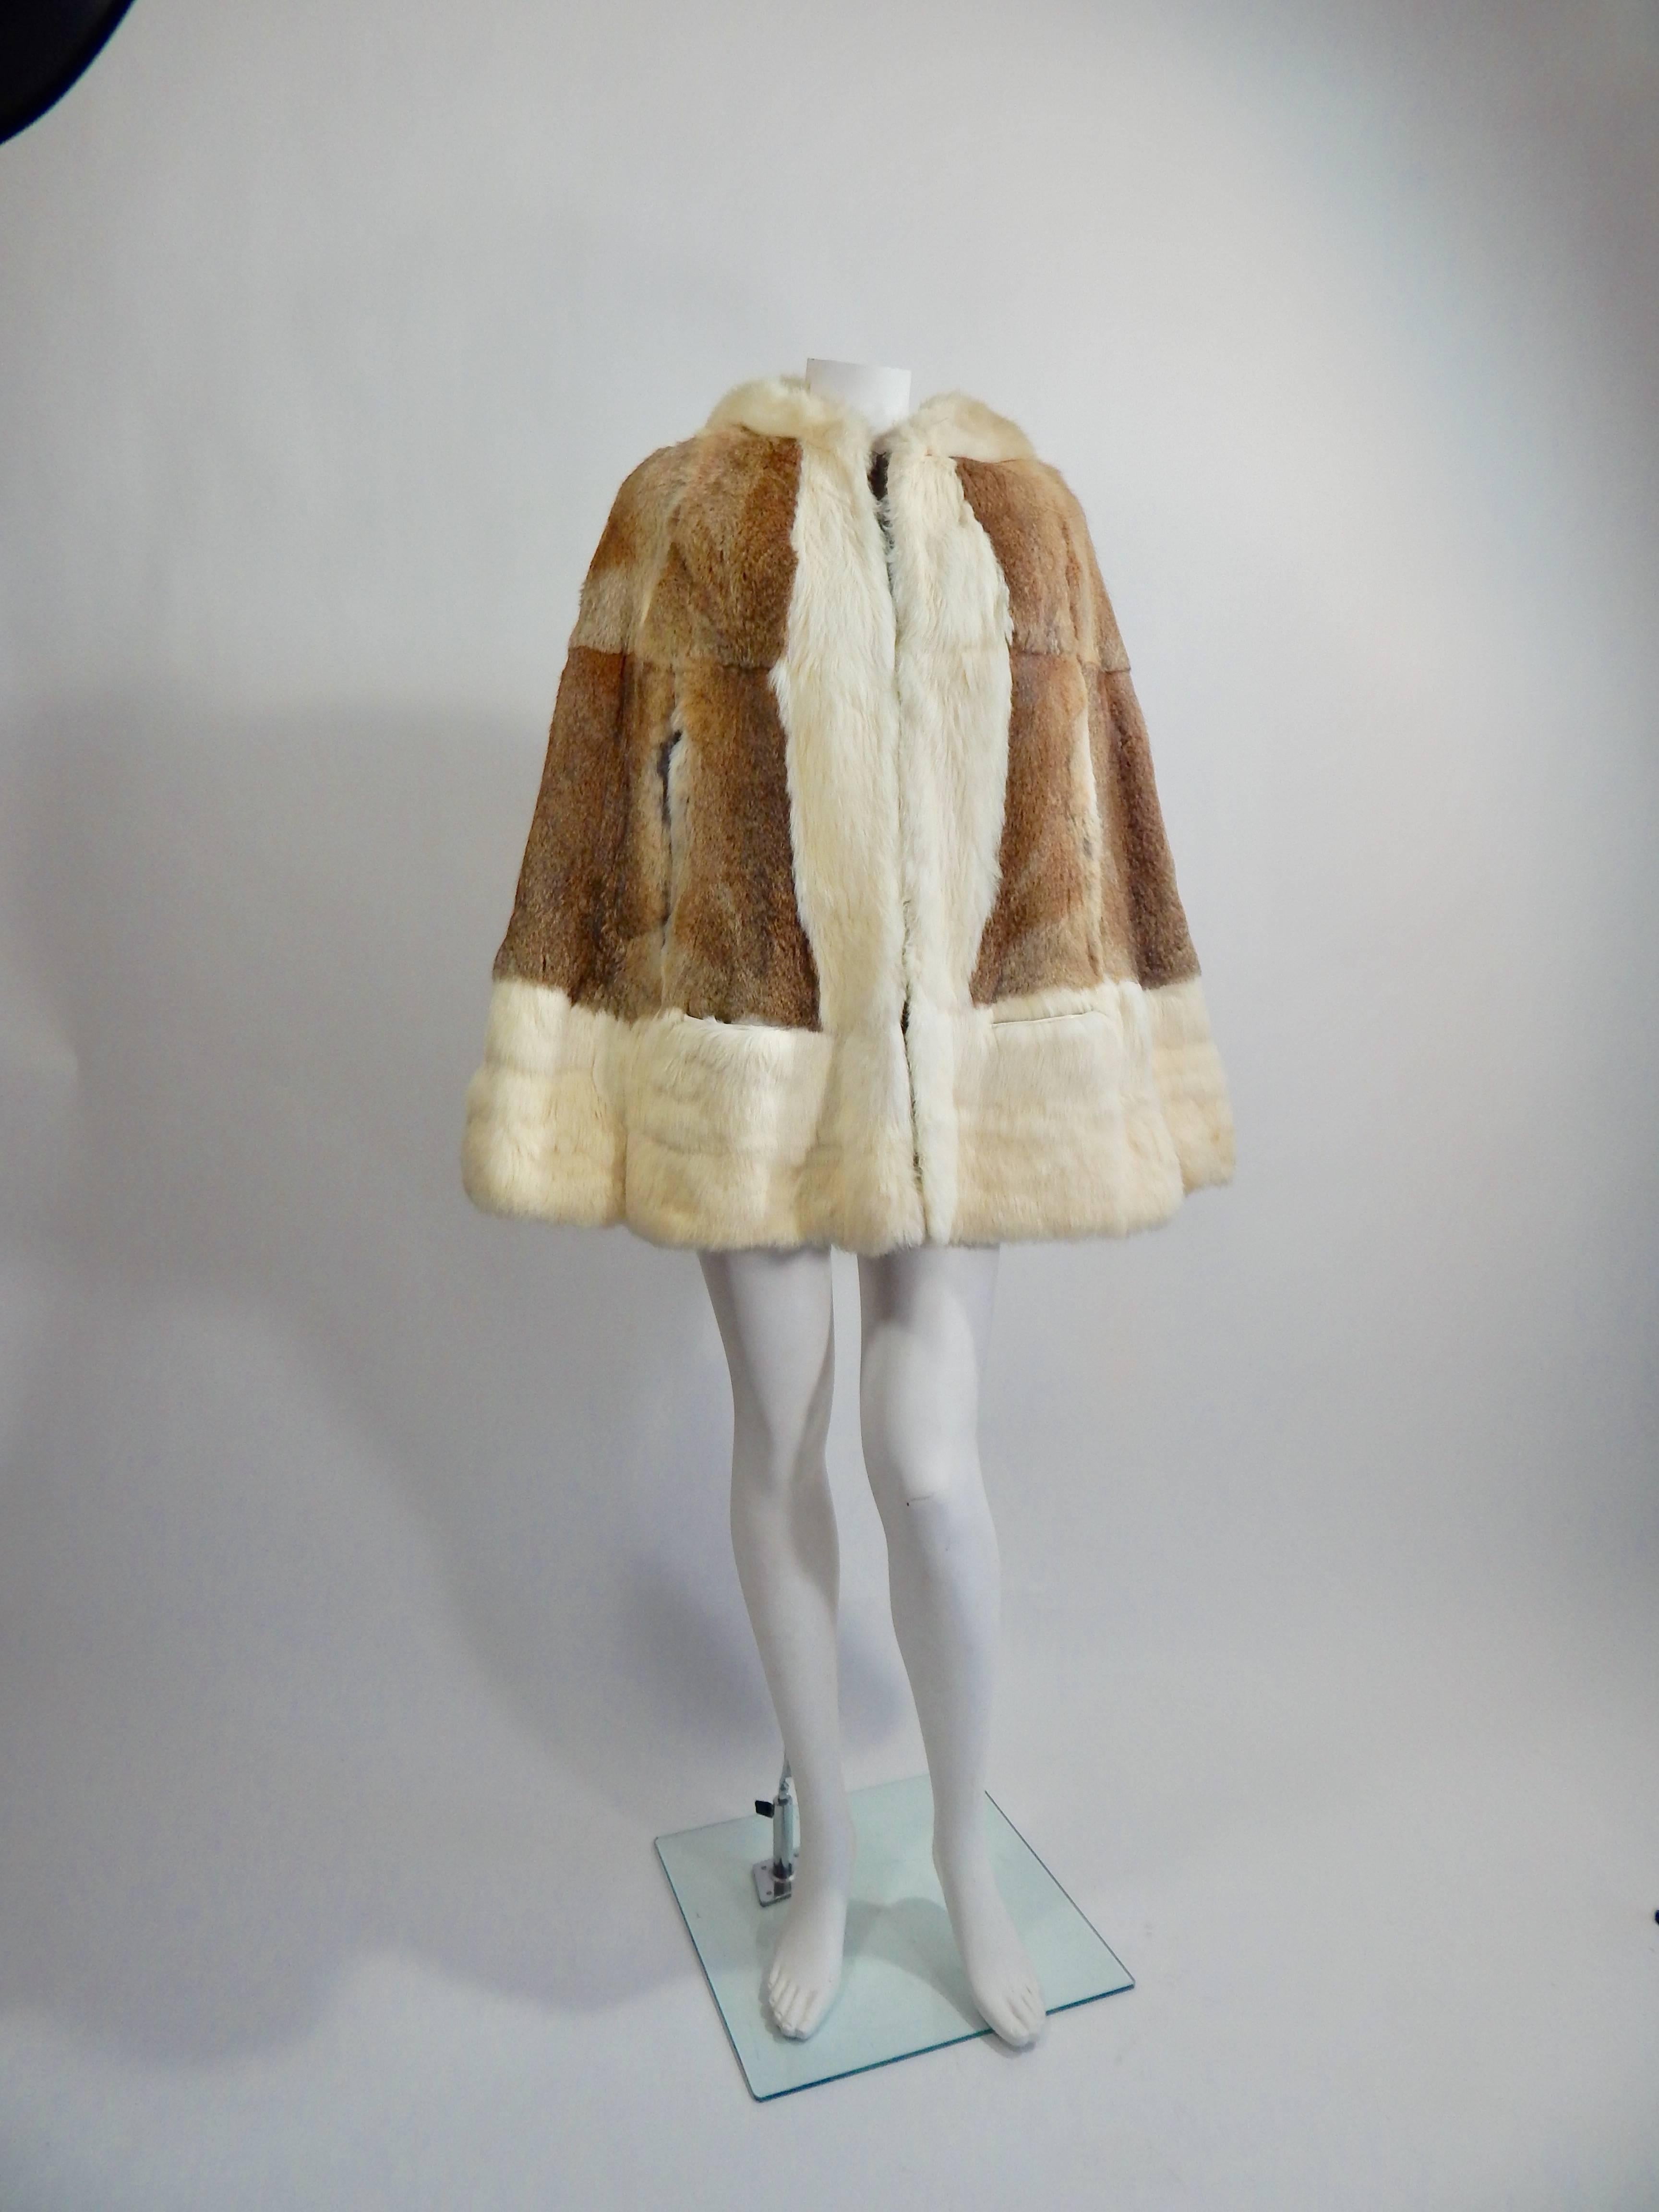 Gorgeous 1960s Fur Cape with Hood. Zipper up front Hook at neck. Arm holes and hand pockets. Fully lined in Chocolate Brown Silk. Size is versatile. Length is 30 inches. Interior and Exterior are both in Excellent Condition. 